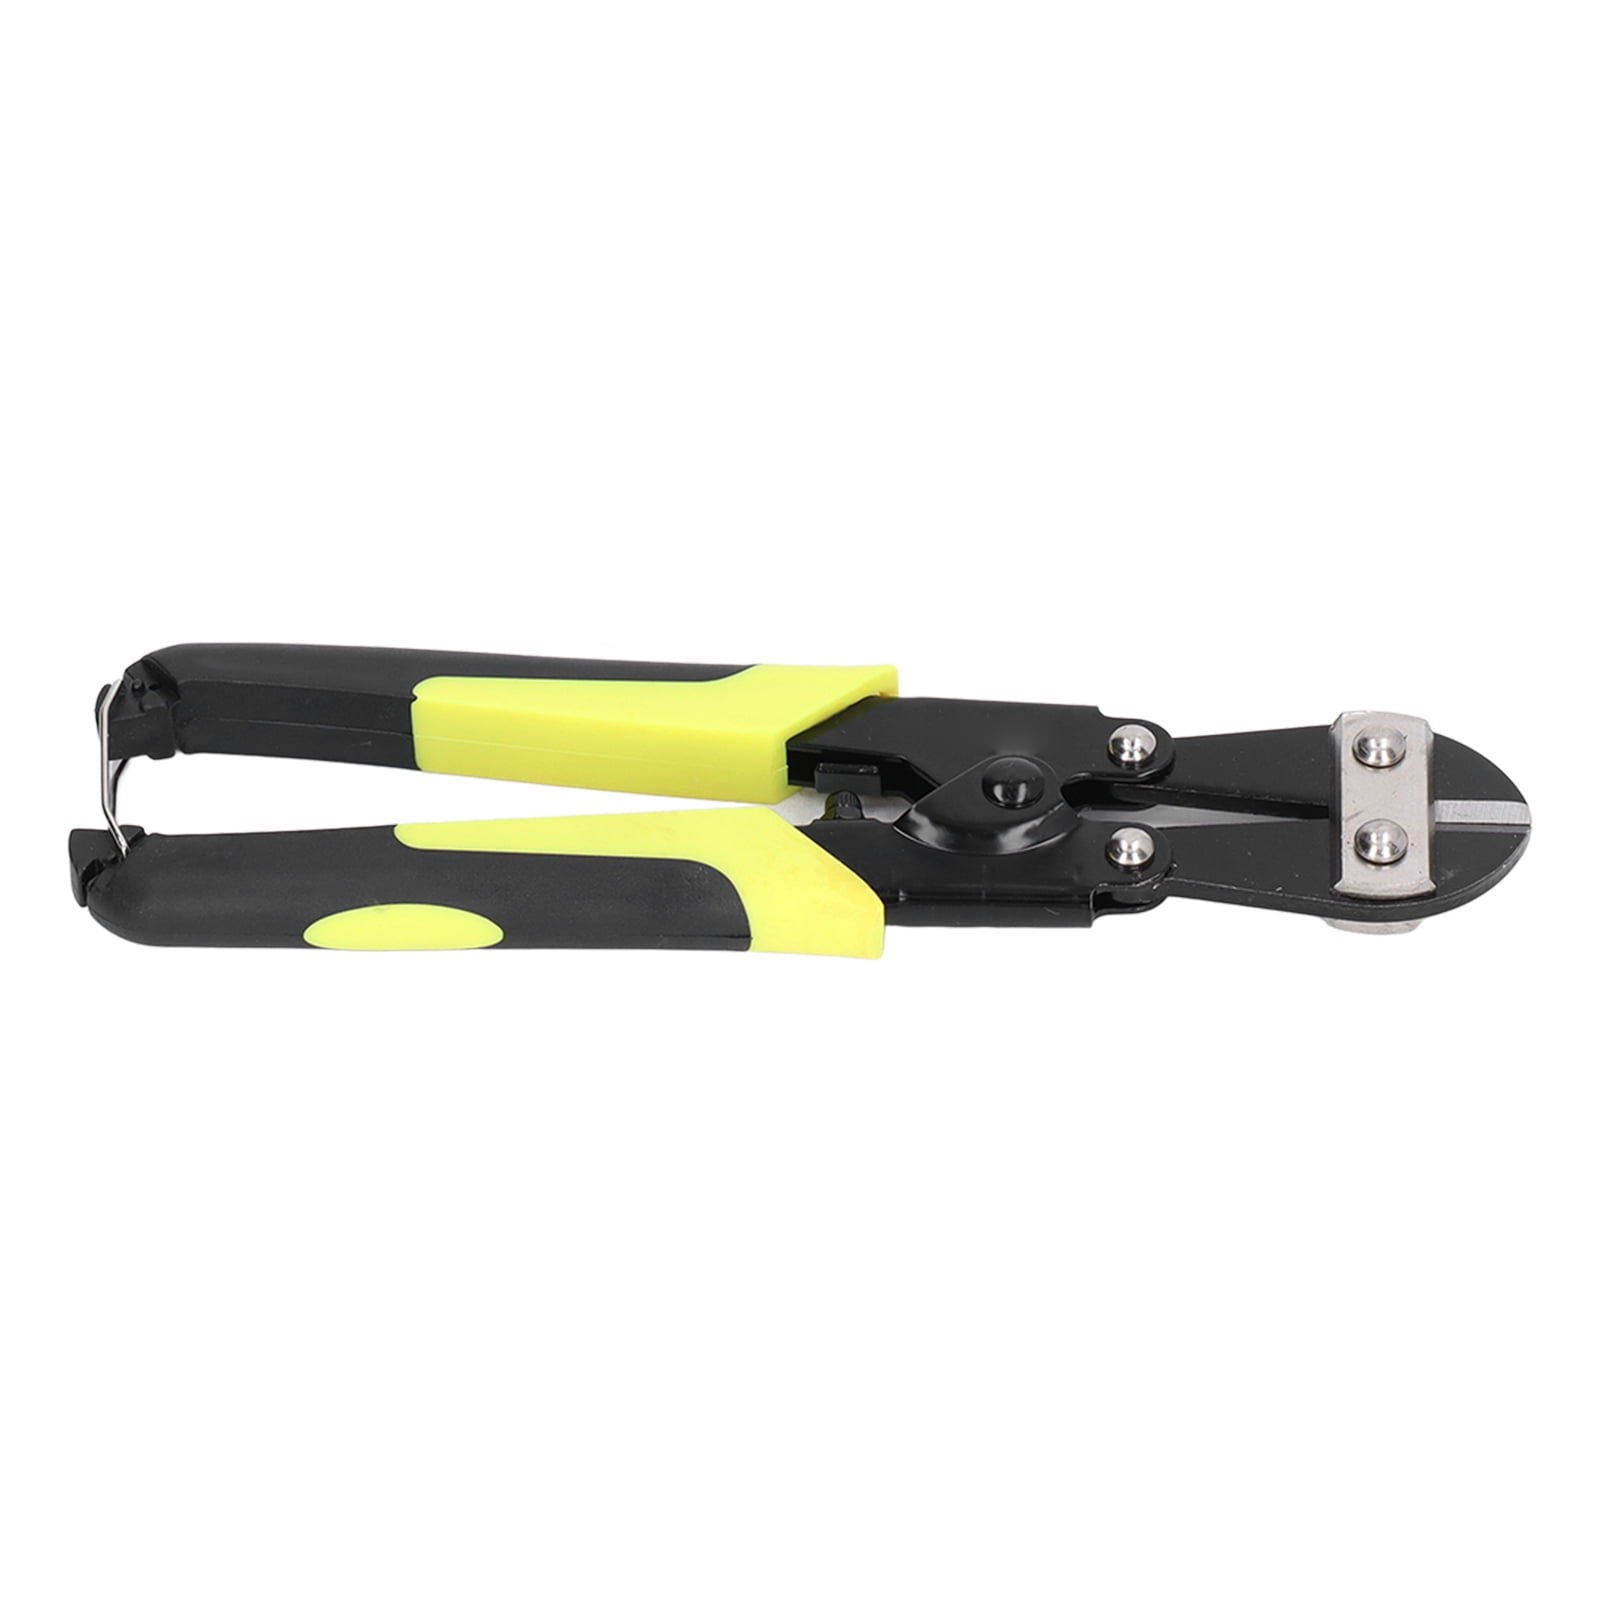 Maxpower Mini Bolt Cutter 8 inch, Multi-functional Portable Bolt Cutter with PVC Ergonomic Grip Handle, Safety Lock, for Wires, Bolts, Threaded Rods